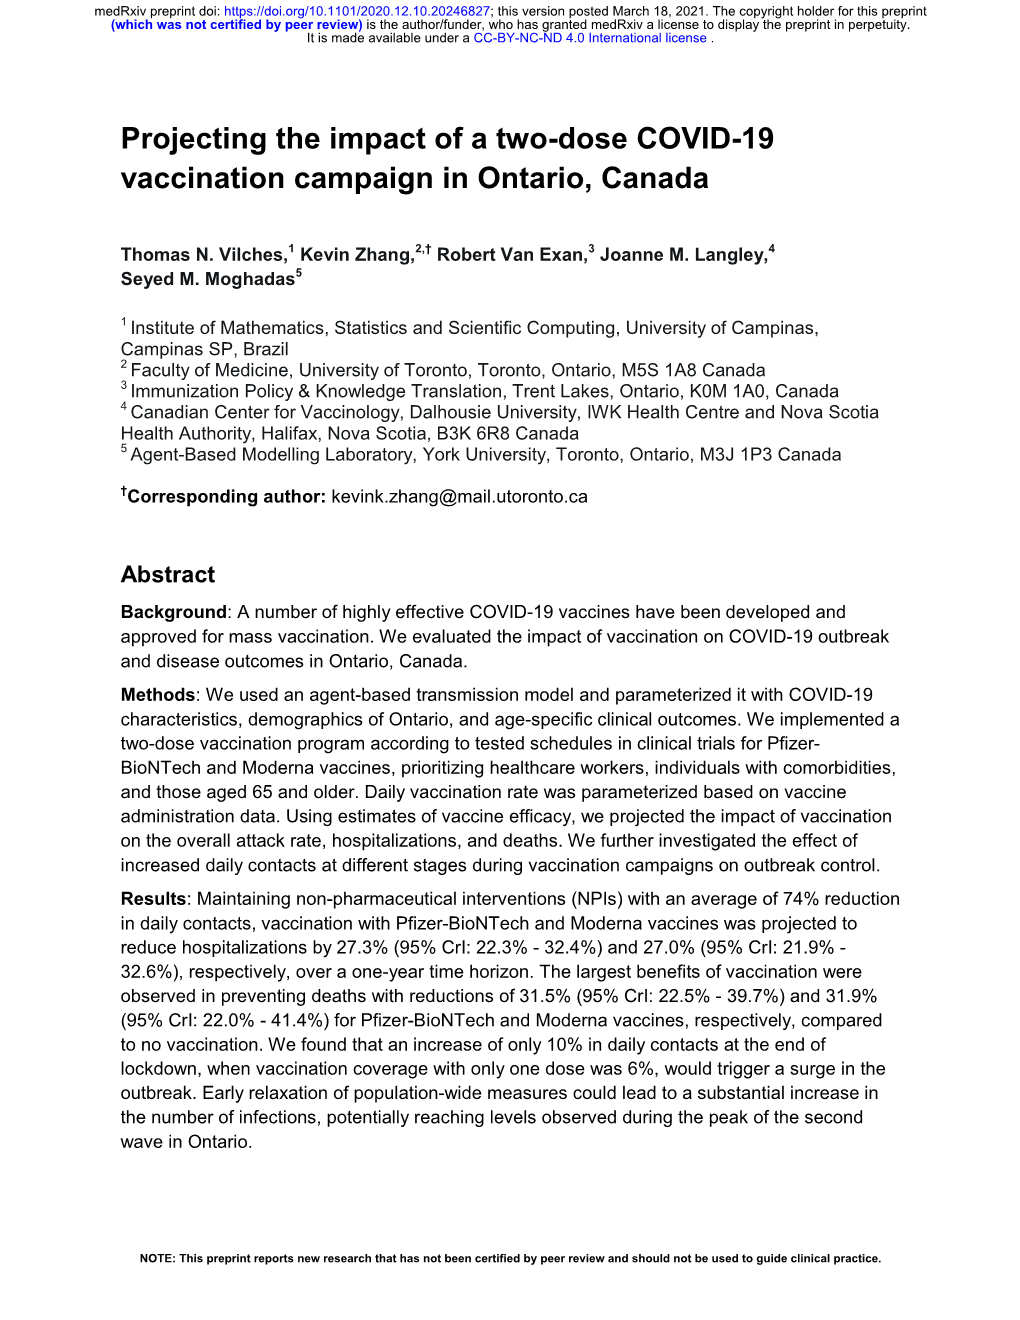 Projecting the Impact of a Two-Dose COVID-19 Vaccination Campaign in Ontario, Canada